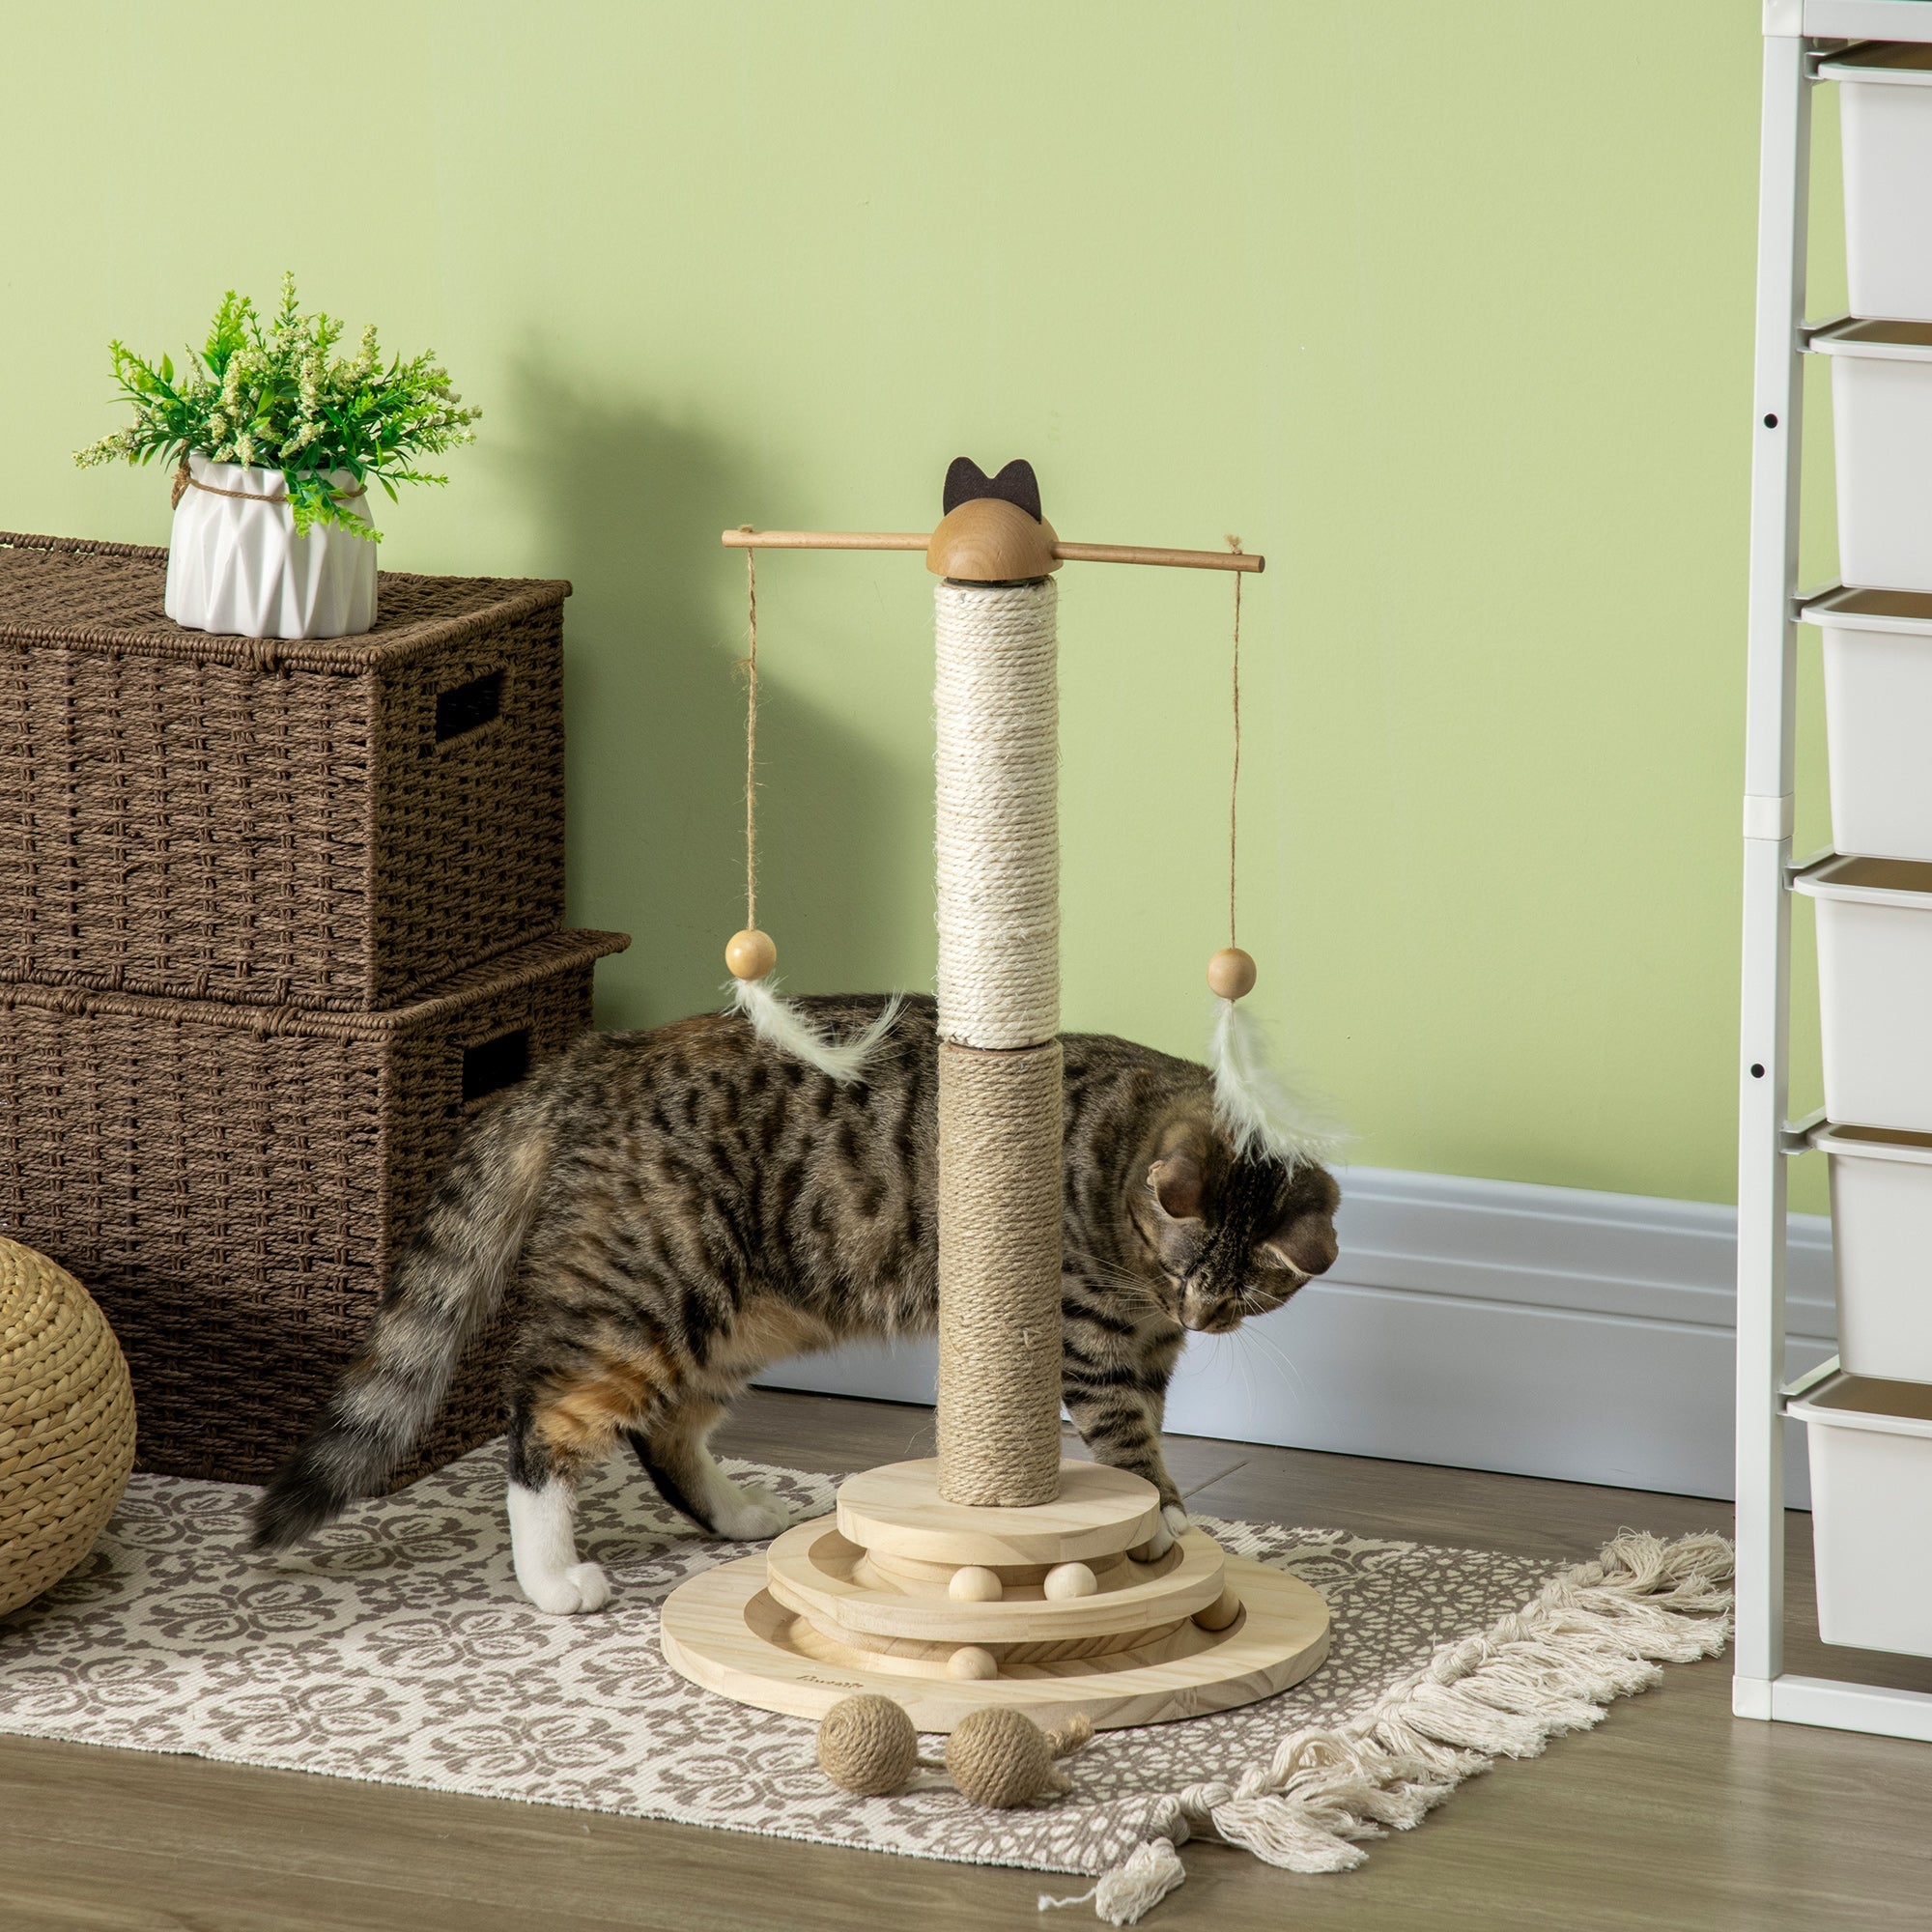 56cm Cat Tree, Kitty Activity Center with Turntable Interactive Ball Toy, Cat Tower with Jute & Sisal Scratching Post, Natural-1